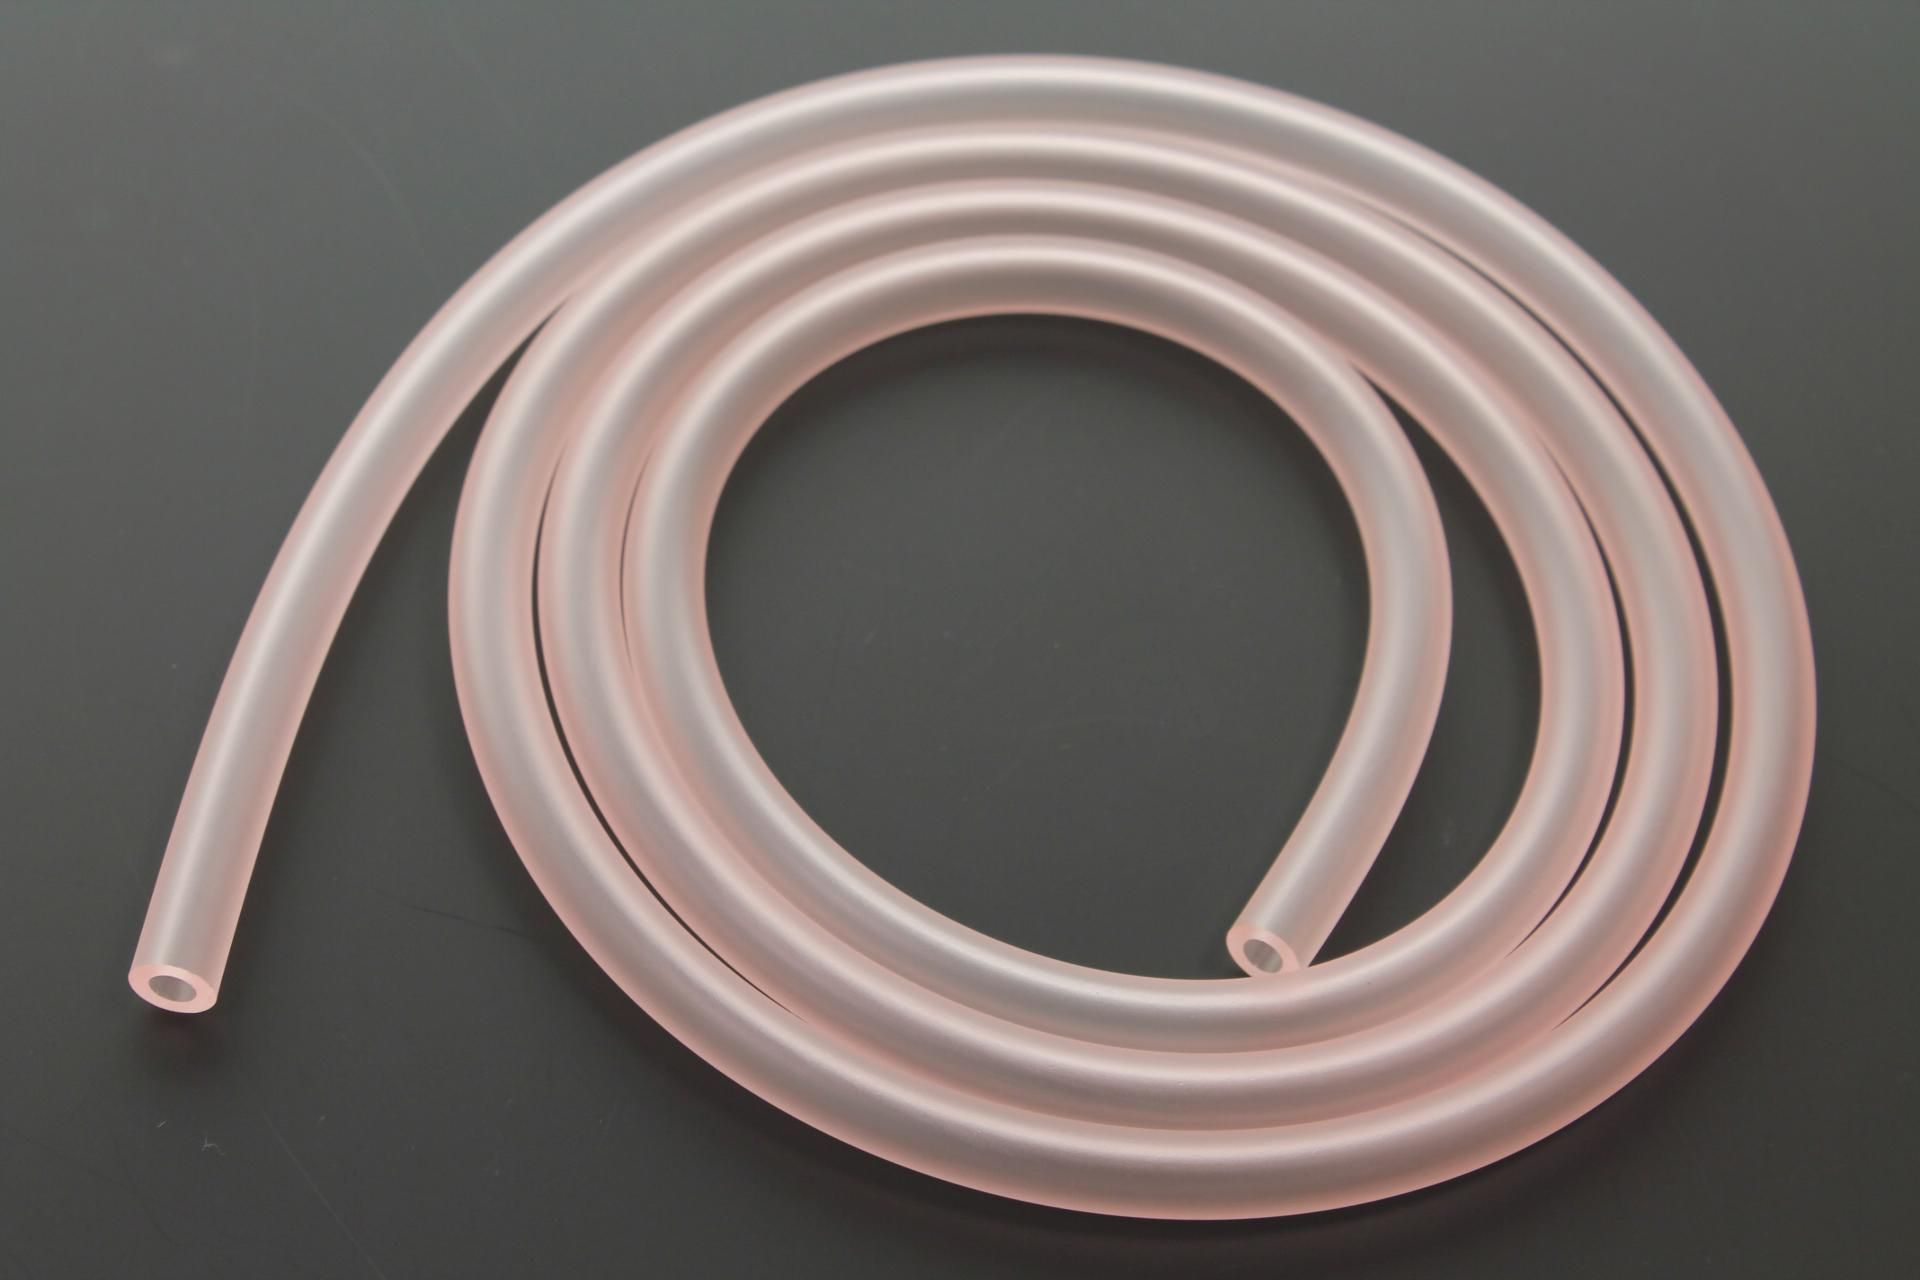 91A20-05100-00 Superseded by 91A20-05145-00 - TUBE, FLEXIBLE